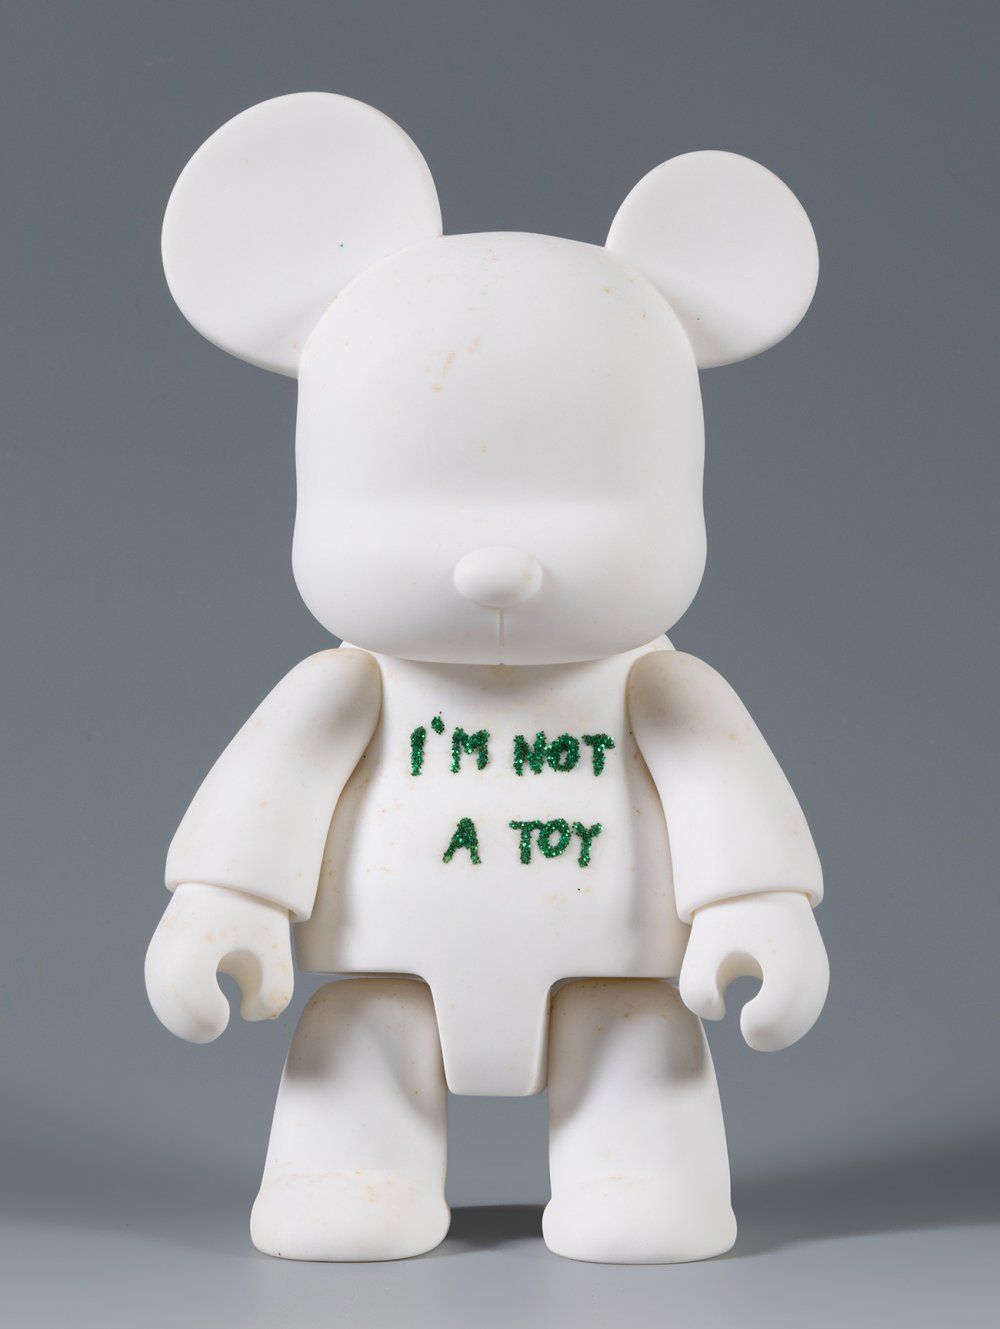 Null VALENTINA MIORANDI (Italie, 1982).
Toy 2r "Im not a toy of yours", 2012.
Pe&hellip;